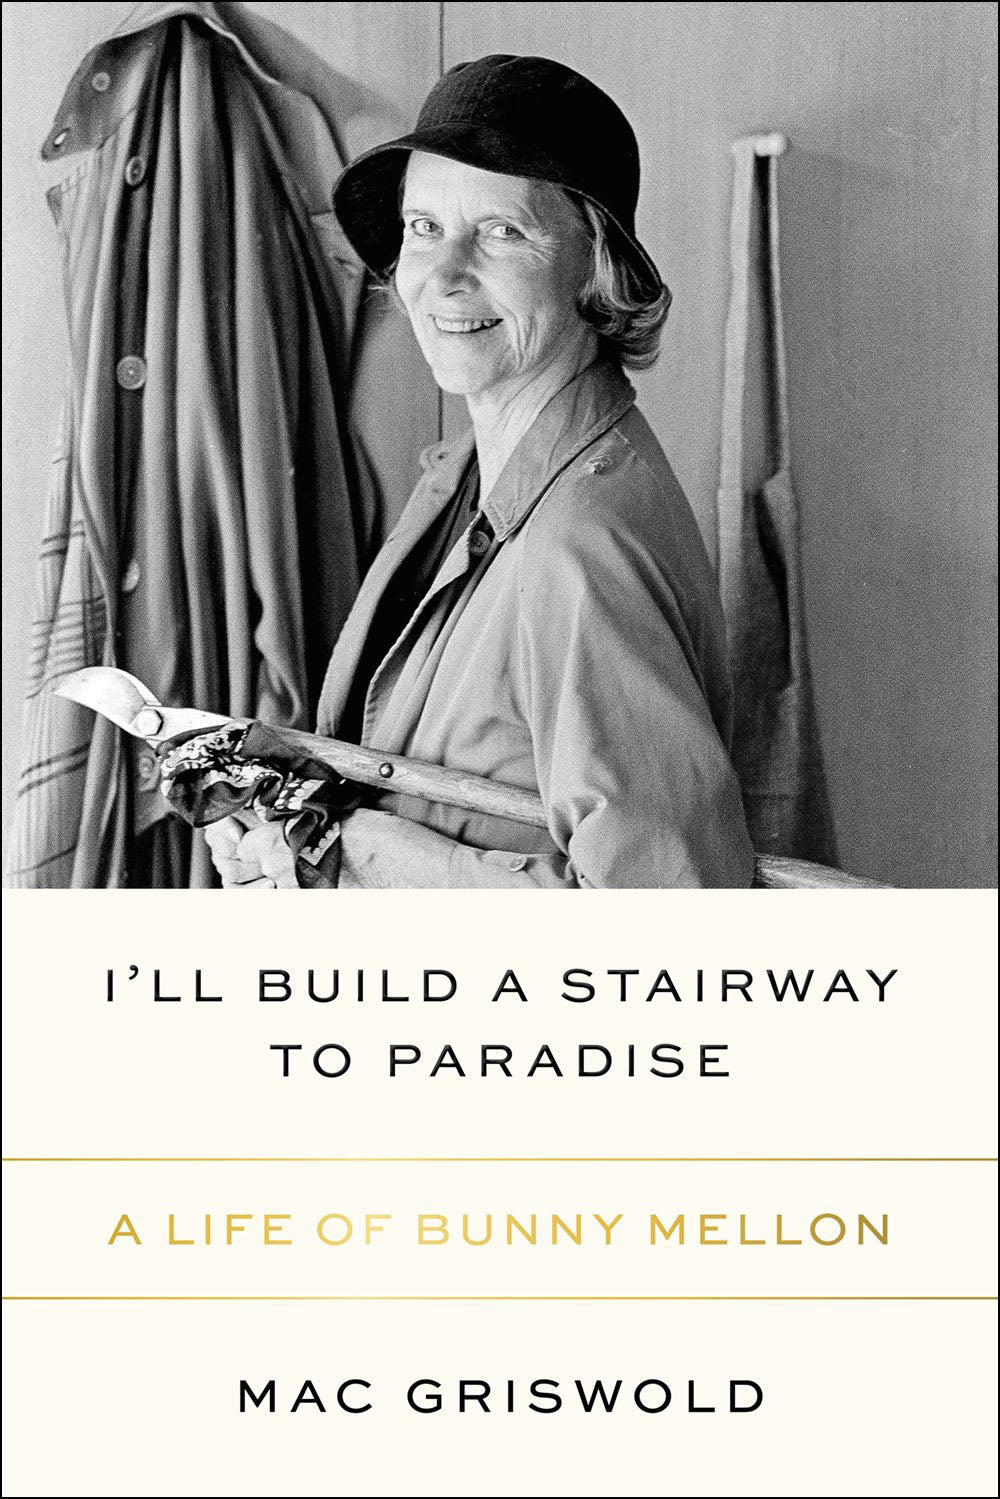 I'll Build A Stairway To Paradise - Bunny Mellon